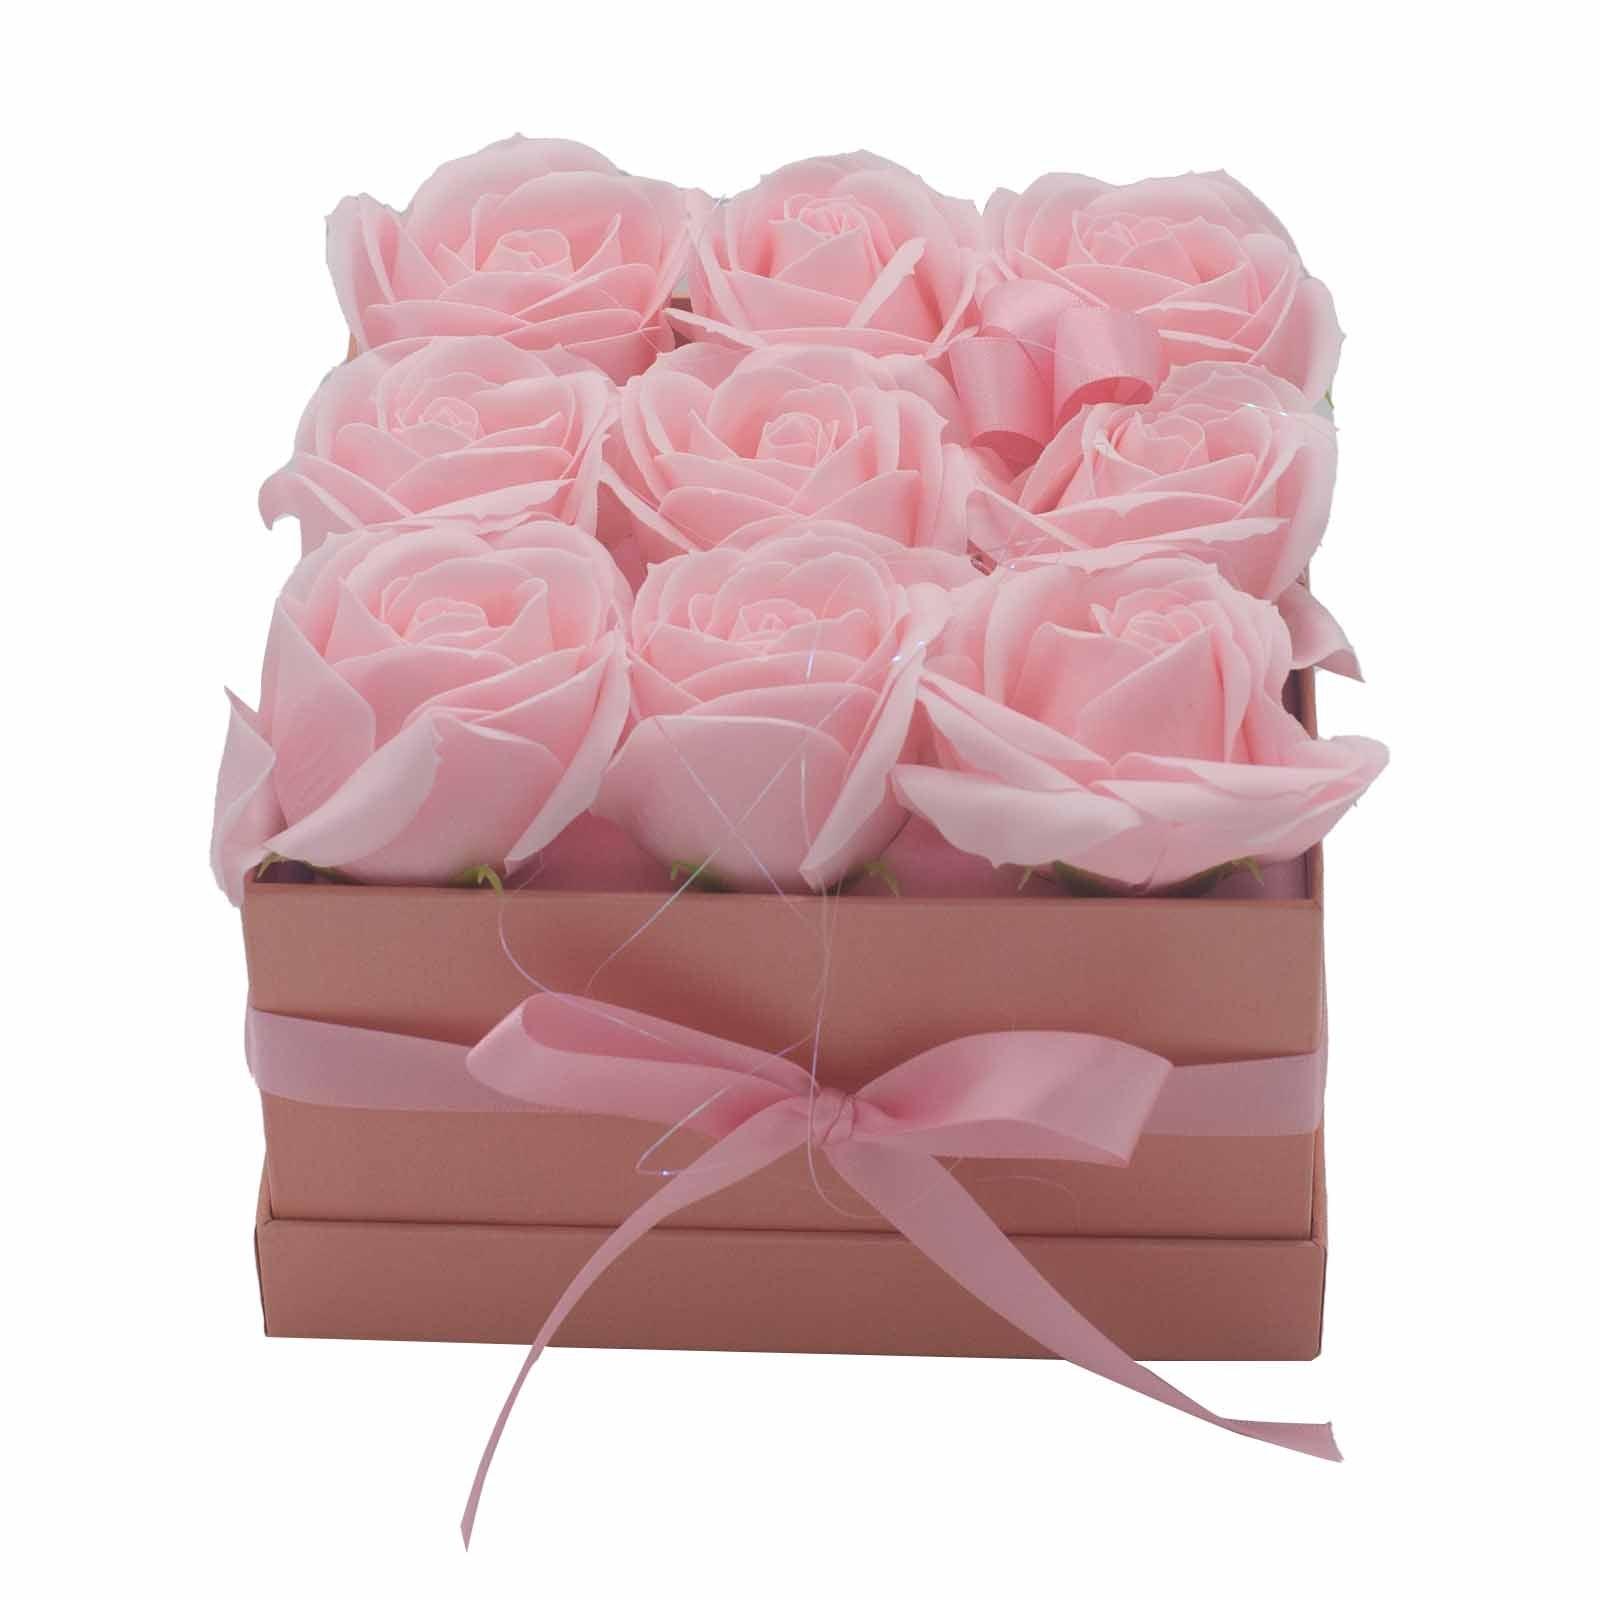 Soap Flower Gift Bouquet - 9 Pink Roses - Square - Charming Spaces